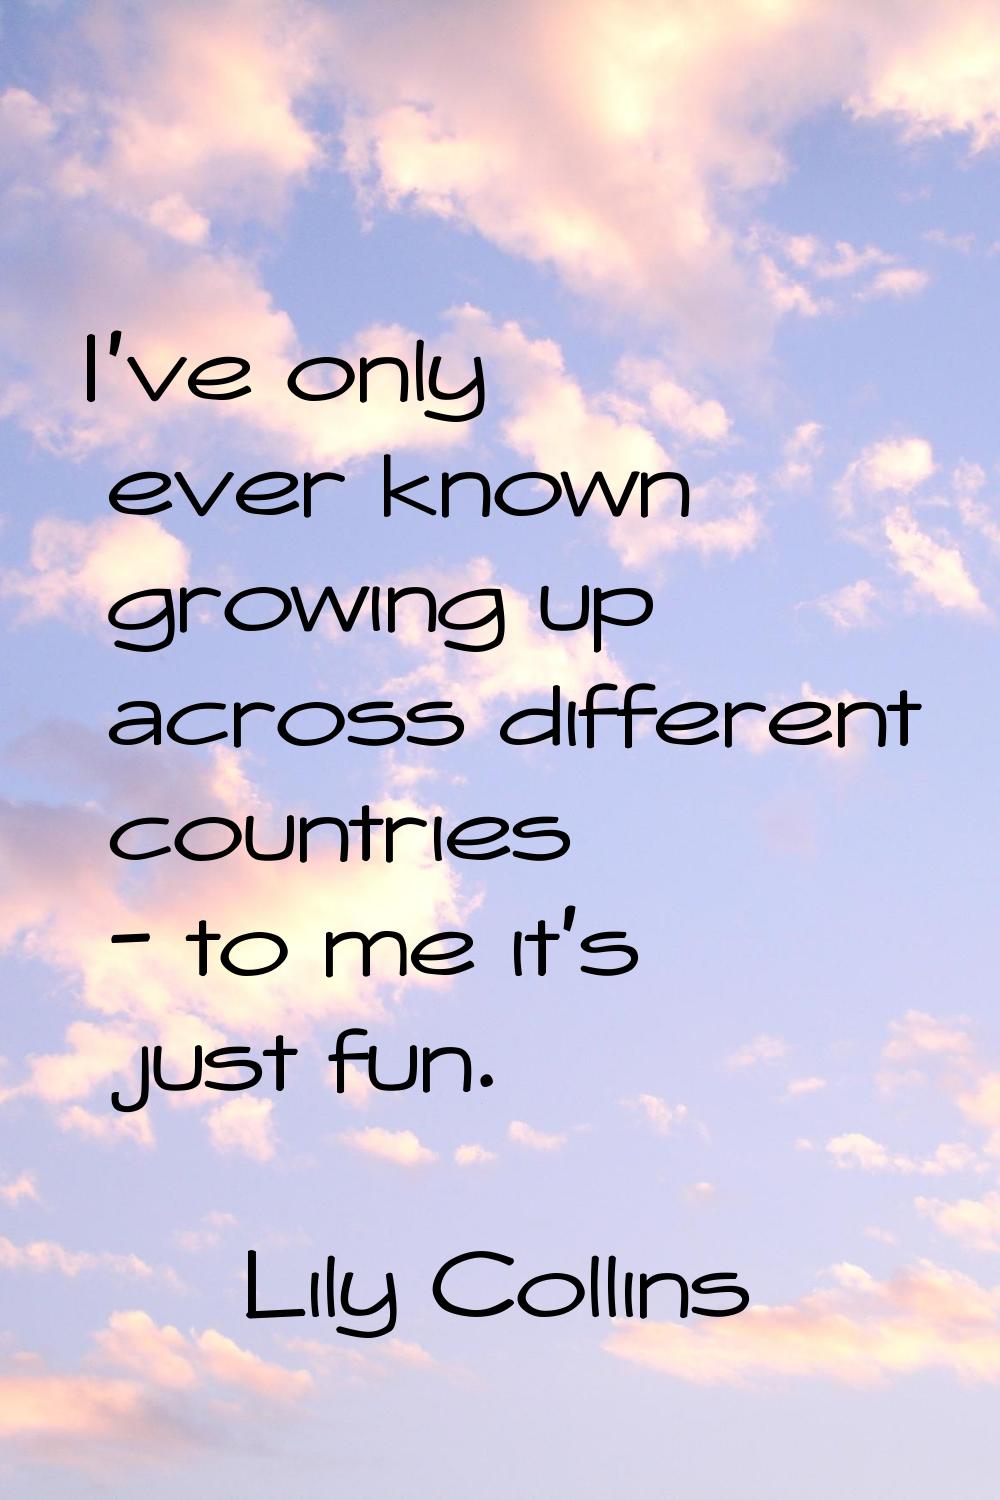 I've only ever known growing up across different countries - to me it's just fun.